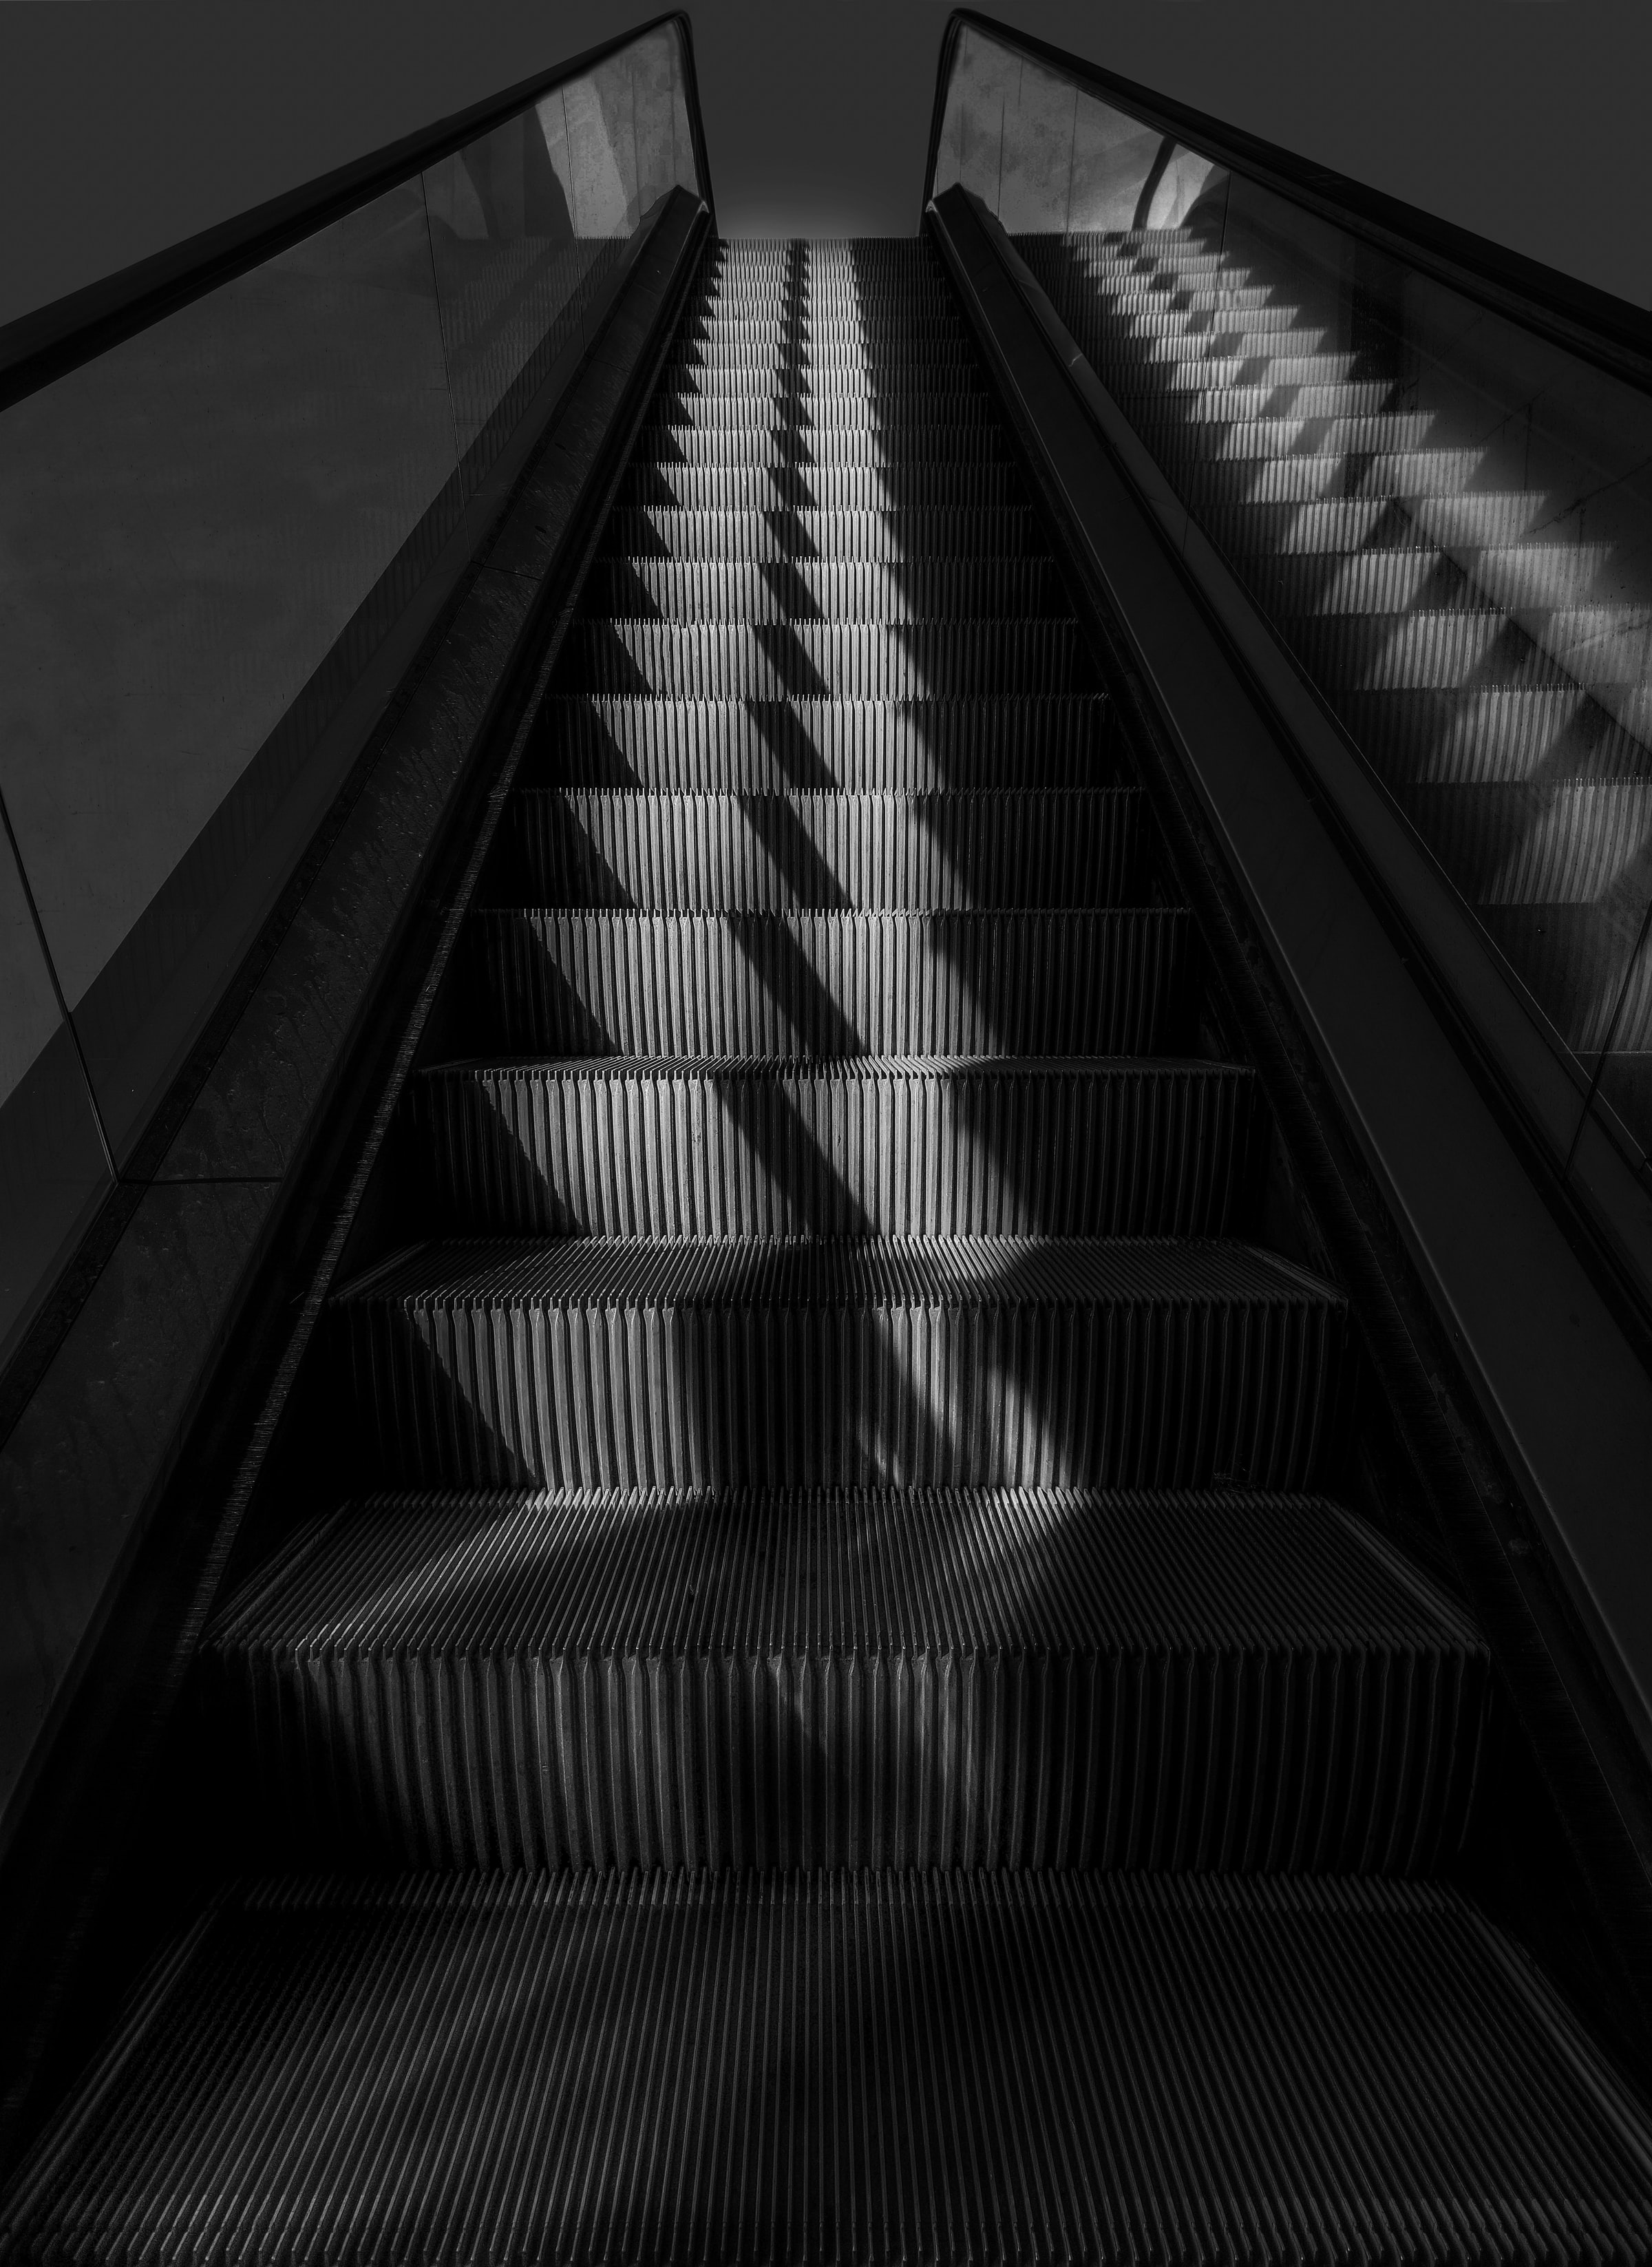 78988 Screensavers and Wallpapers Stairs for phone. Download miscellanea, miscellaneous, grey, bw, chb, stairs, ladder, escalator pictures for free